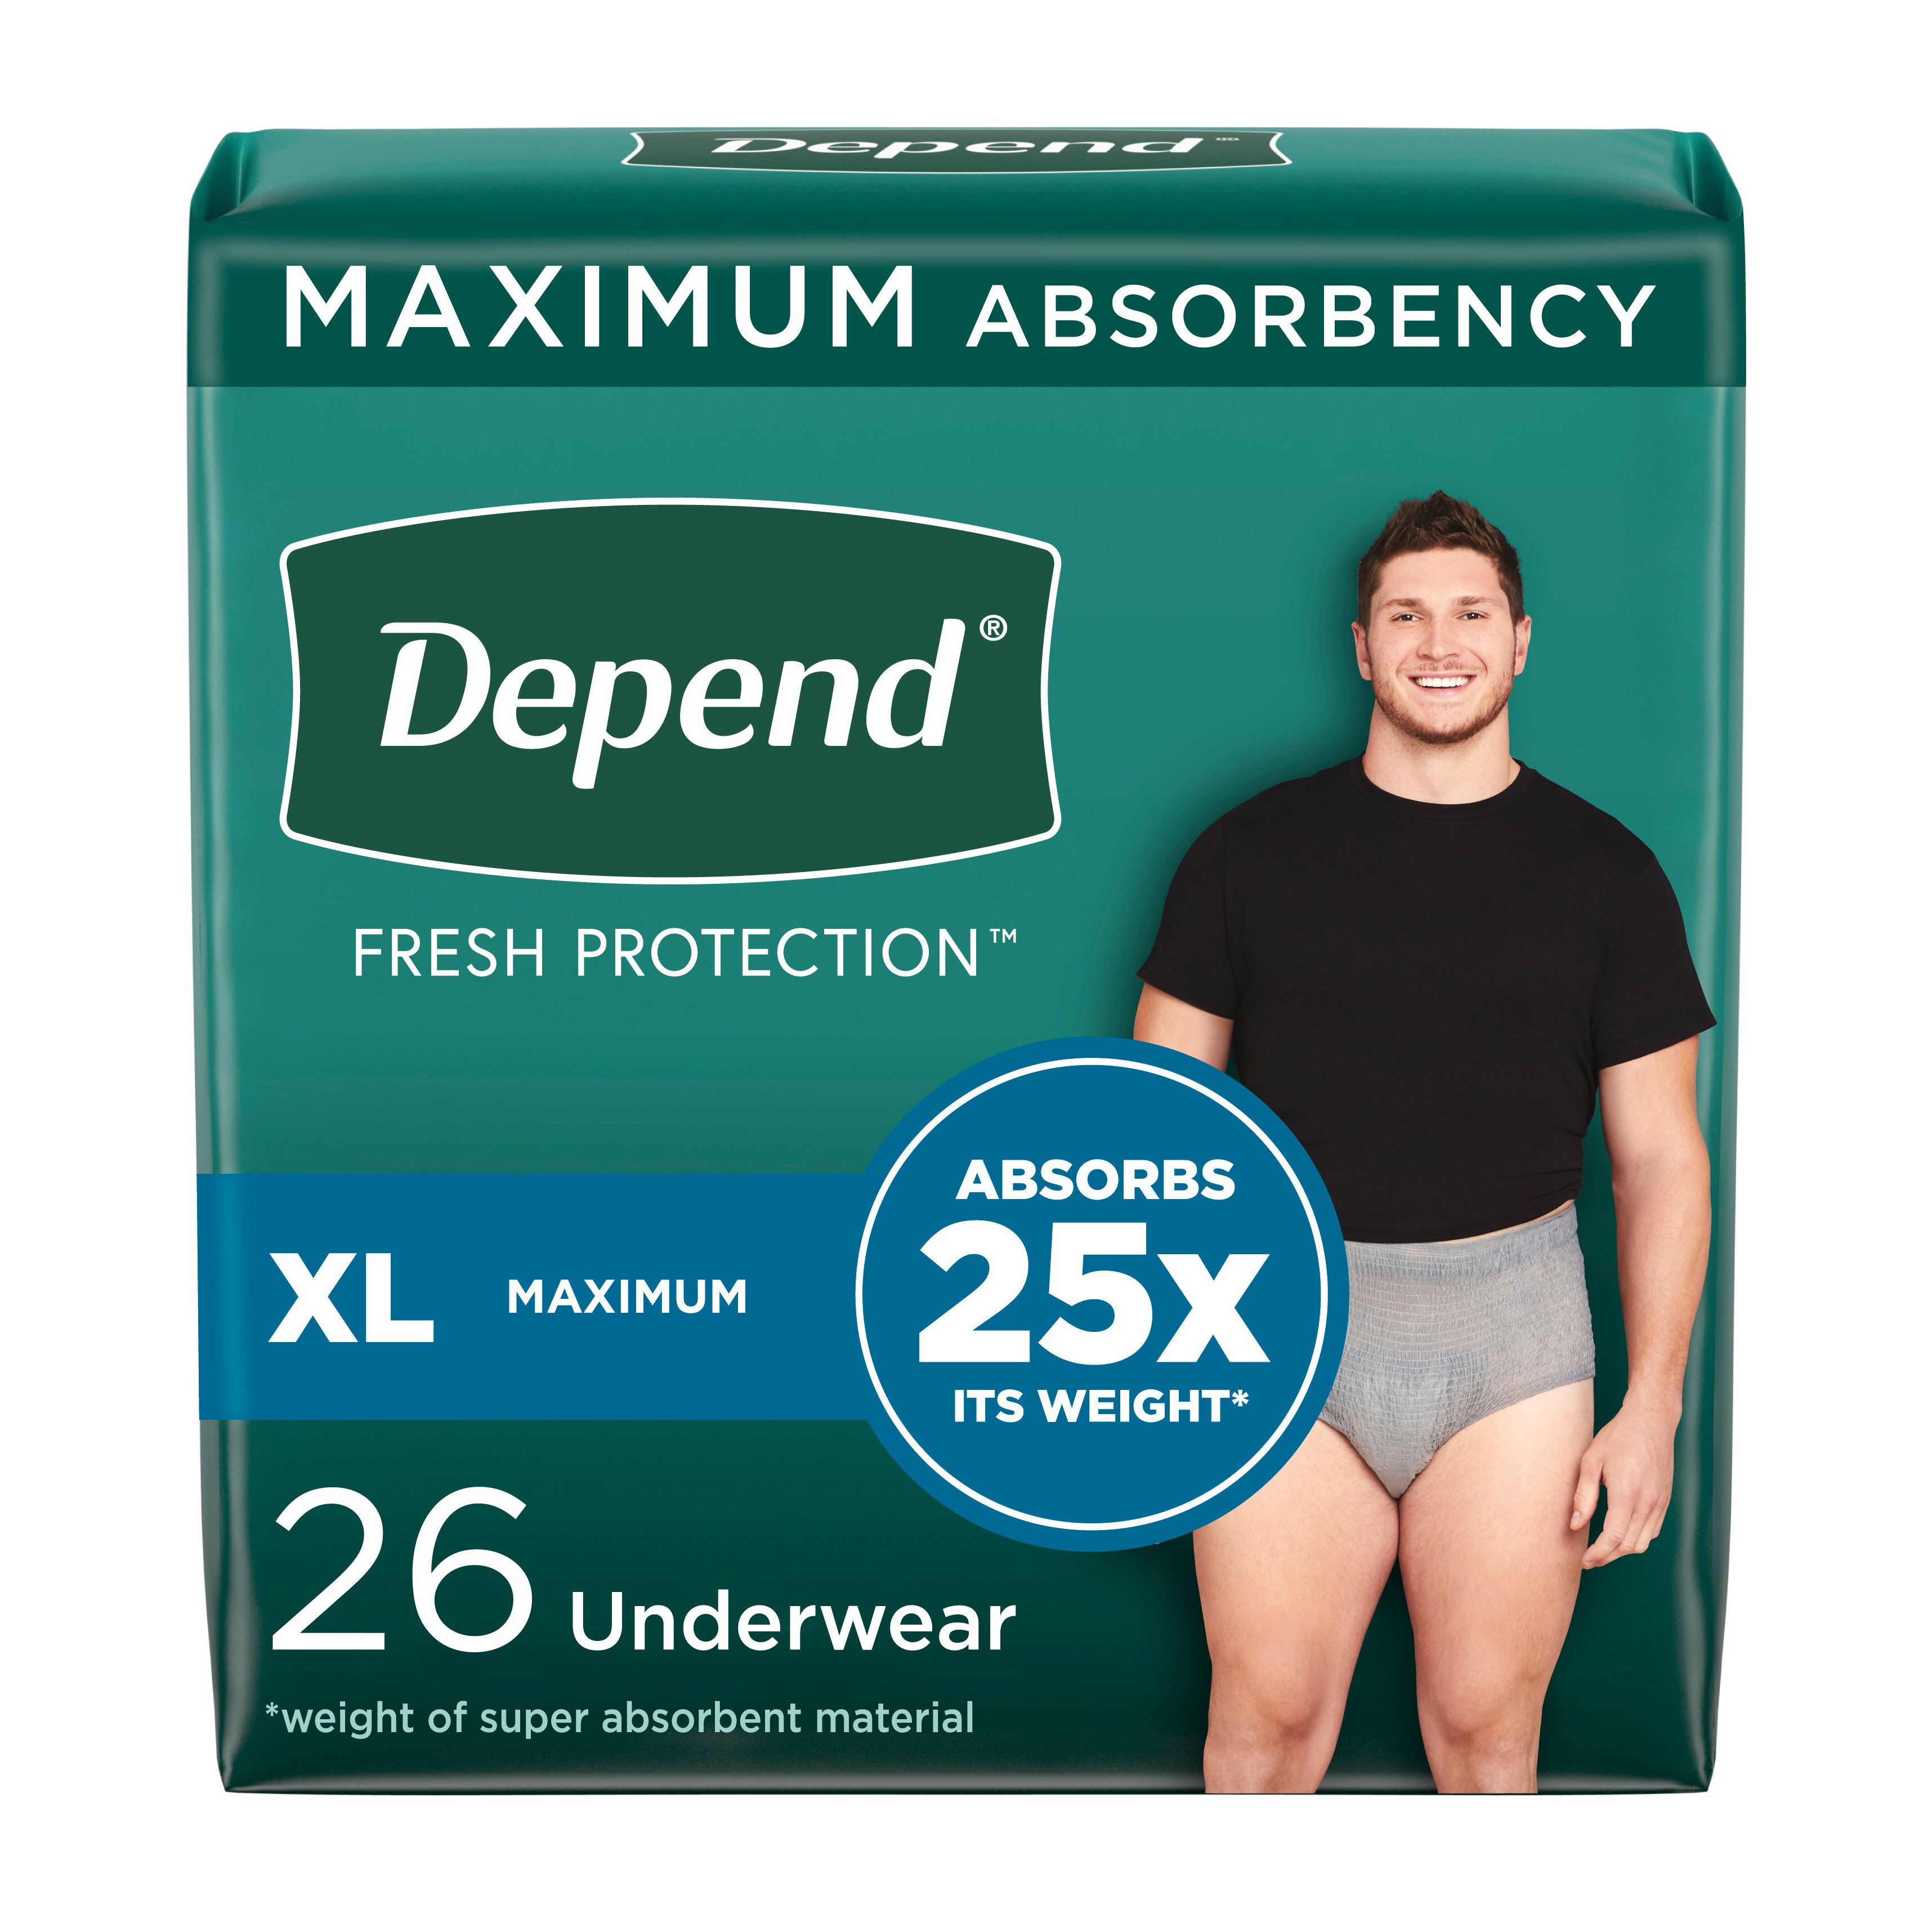 Always Discreet Boutique High-Rise Incontinence Underwear Size S/M Maximum  Rosy, 20 Count, Health & Personal Care